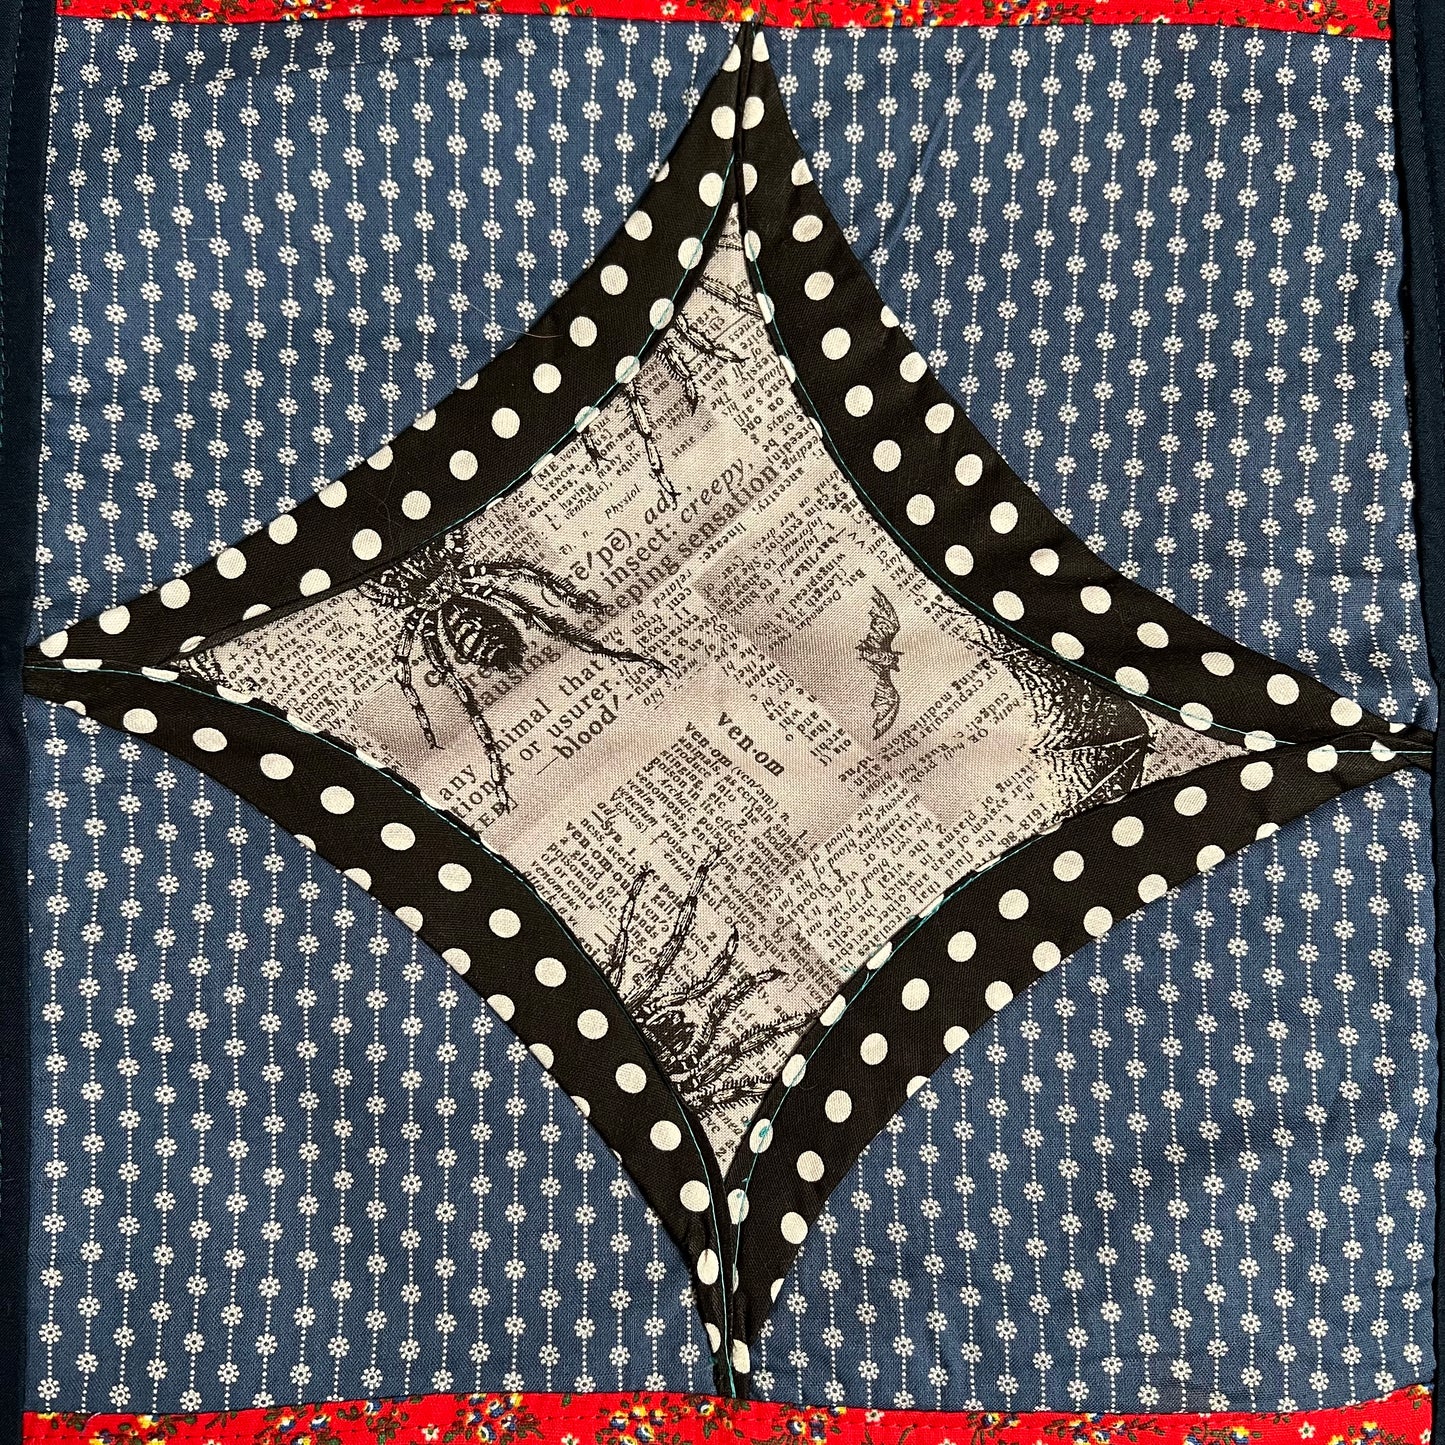 spooky halloween fabric square, surrounded by black and white polkadots, then blue floral linear fabrics.